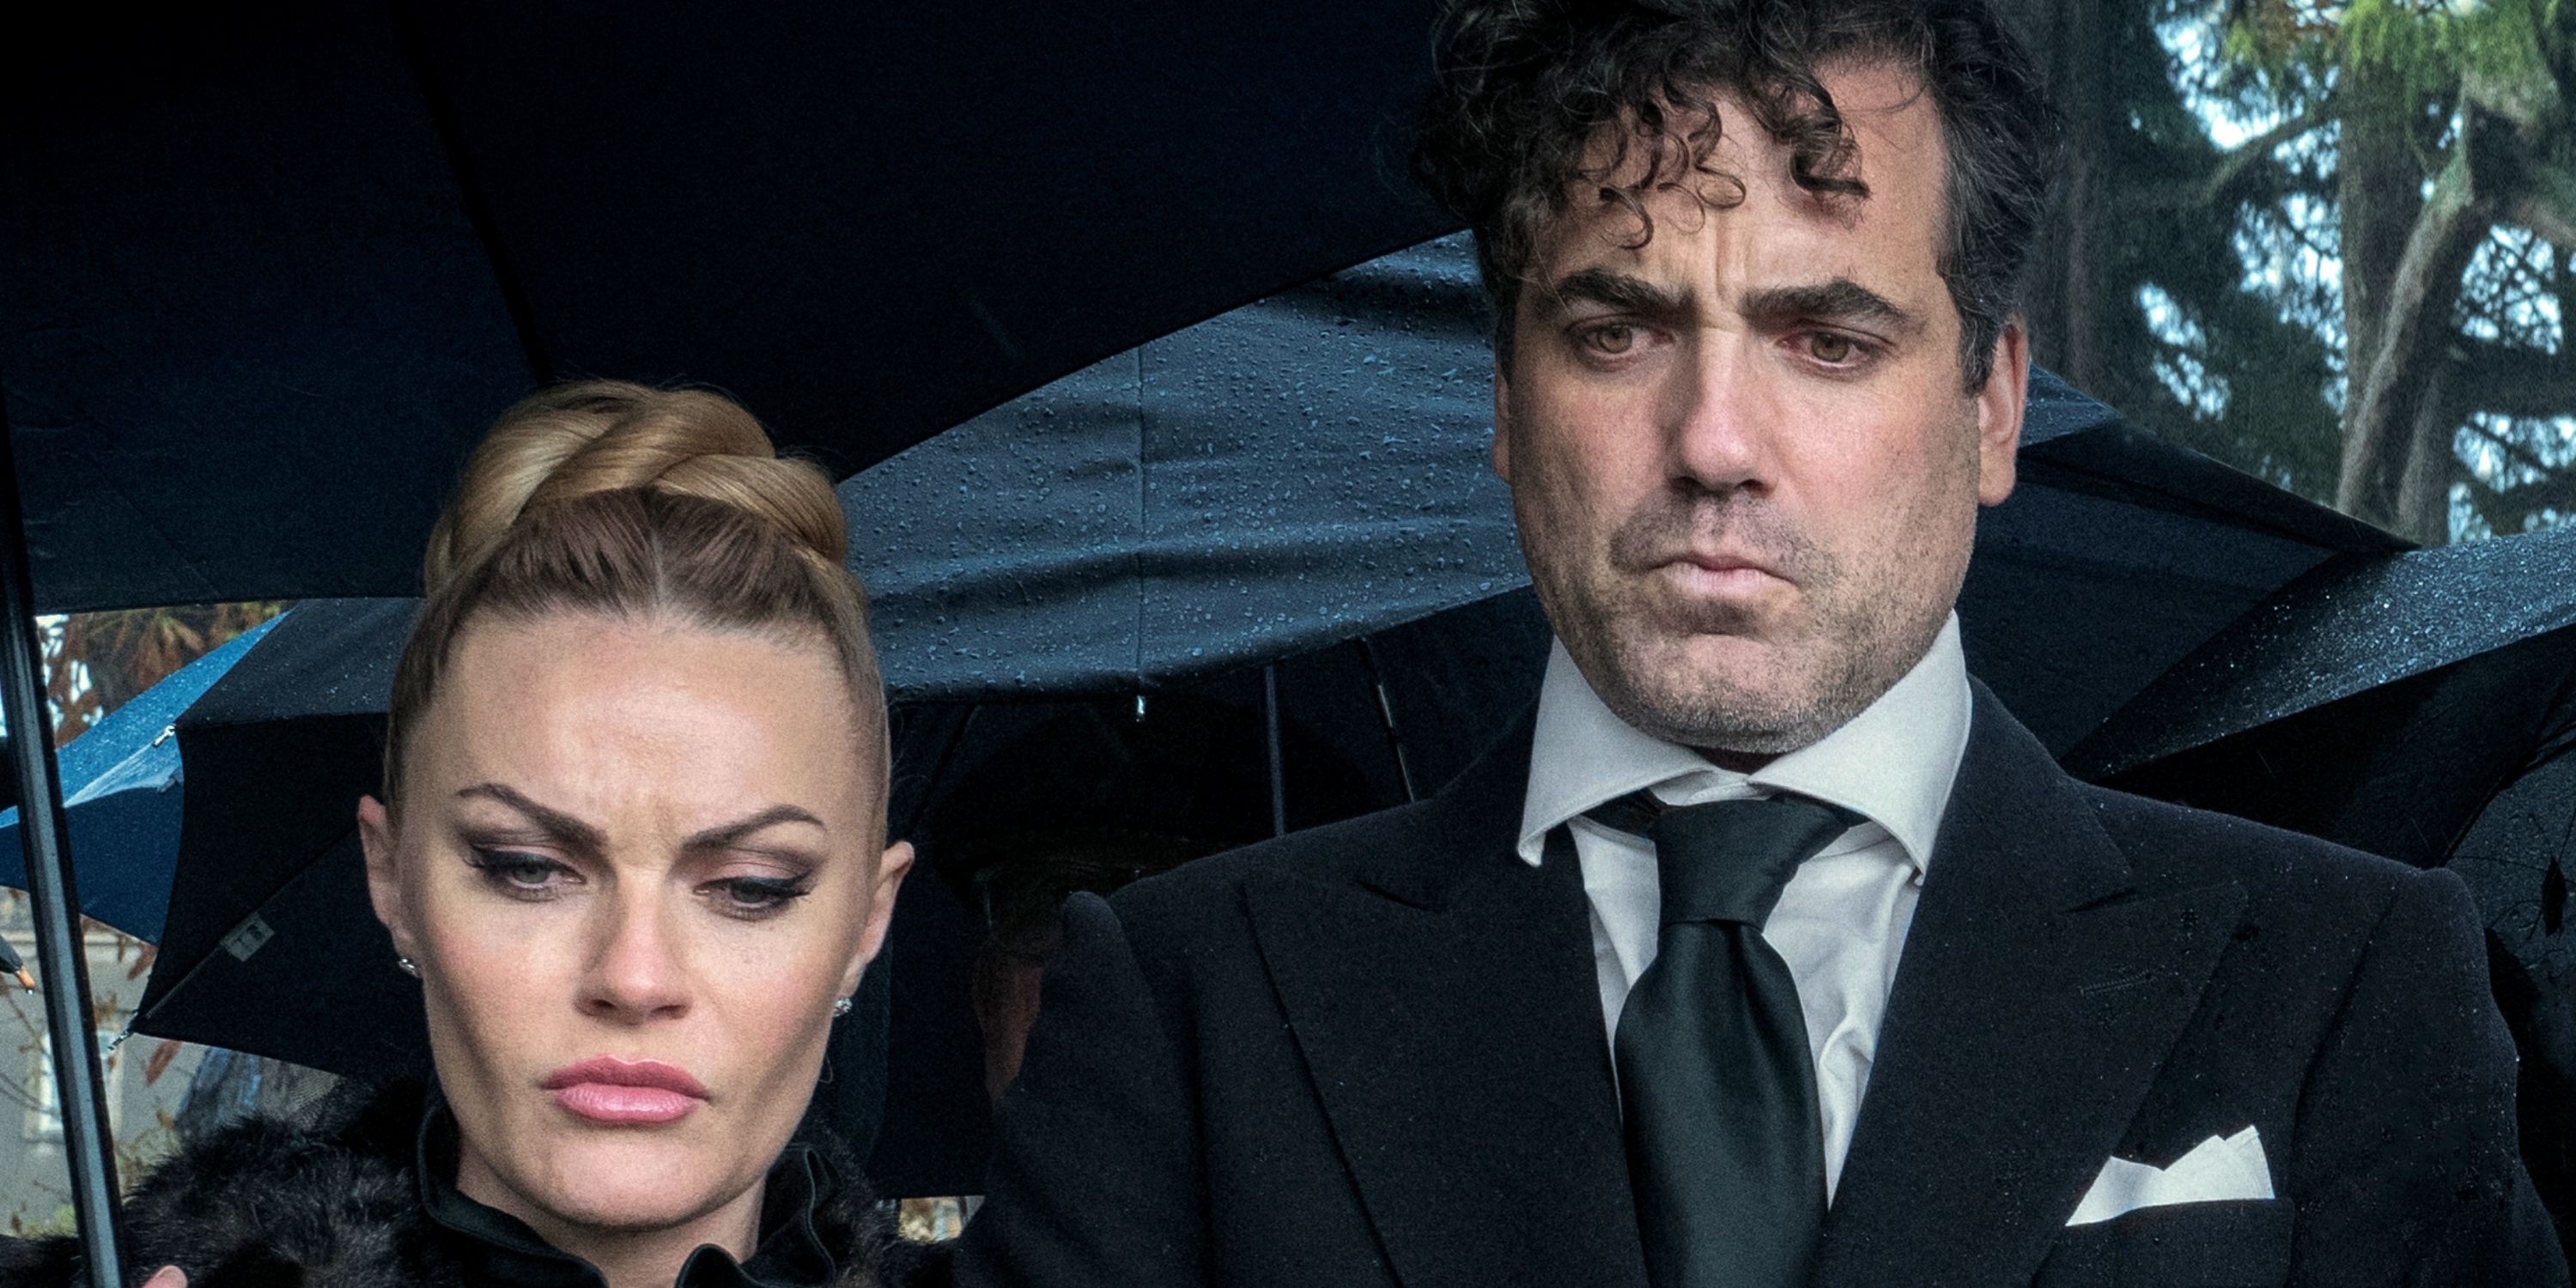 Daniel Ings as Freddy with Chanel Cresswell under umbrellas at a funeral in The Gentlemen